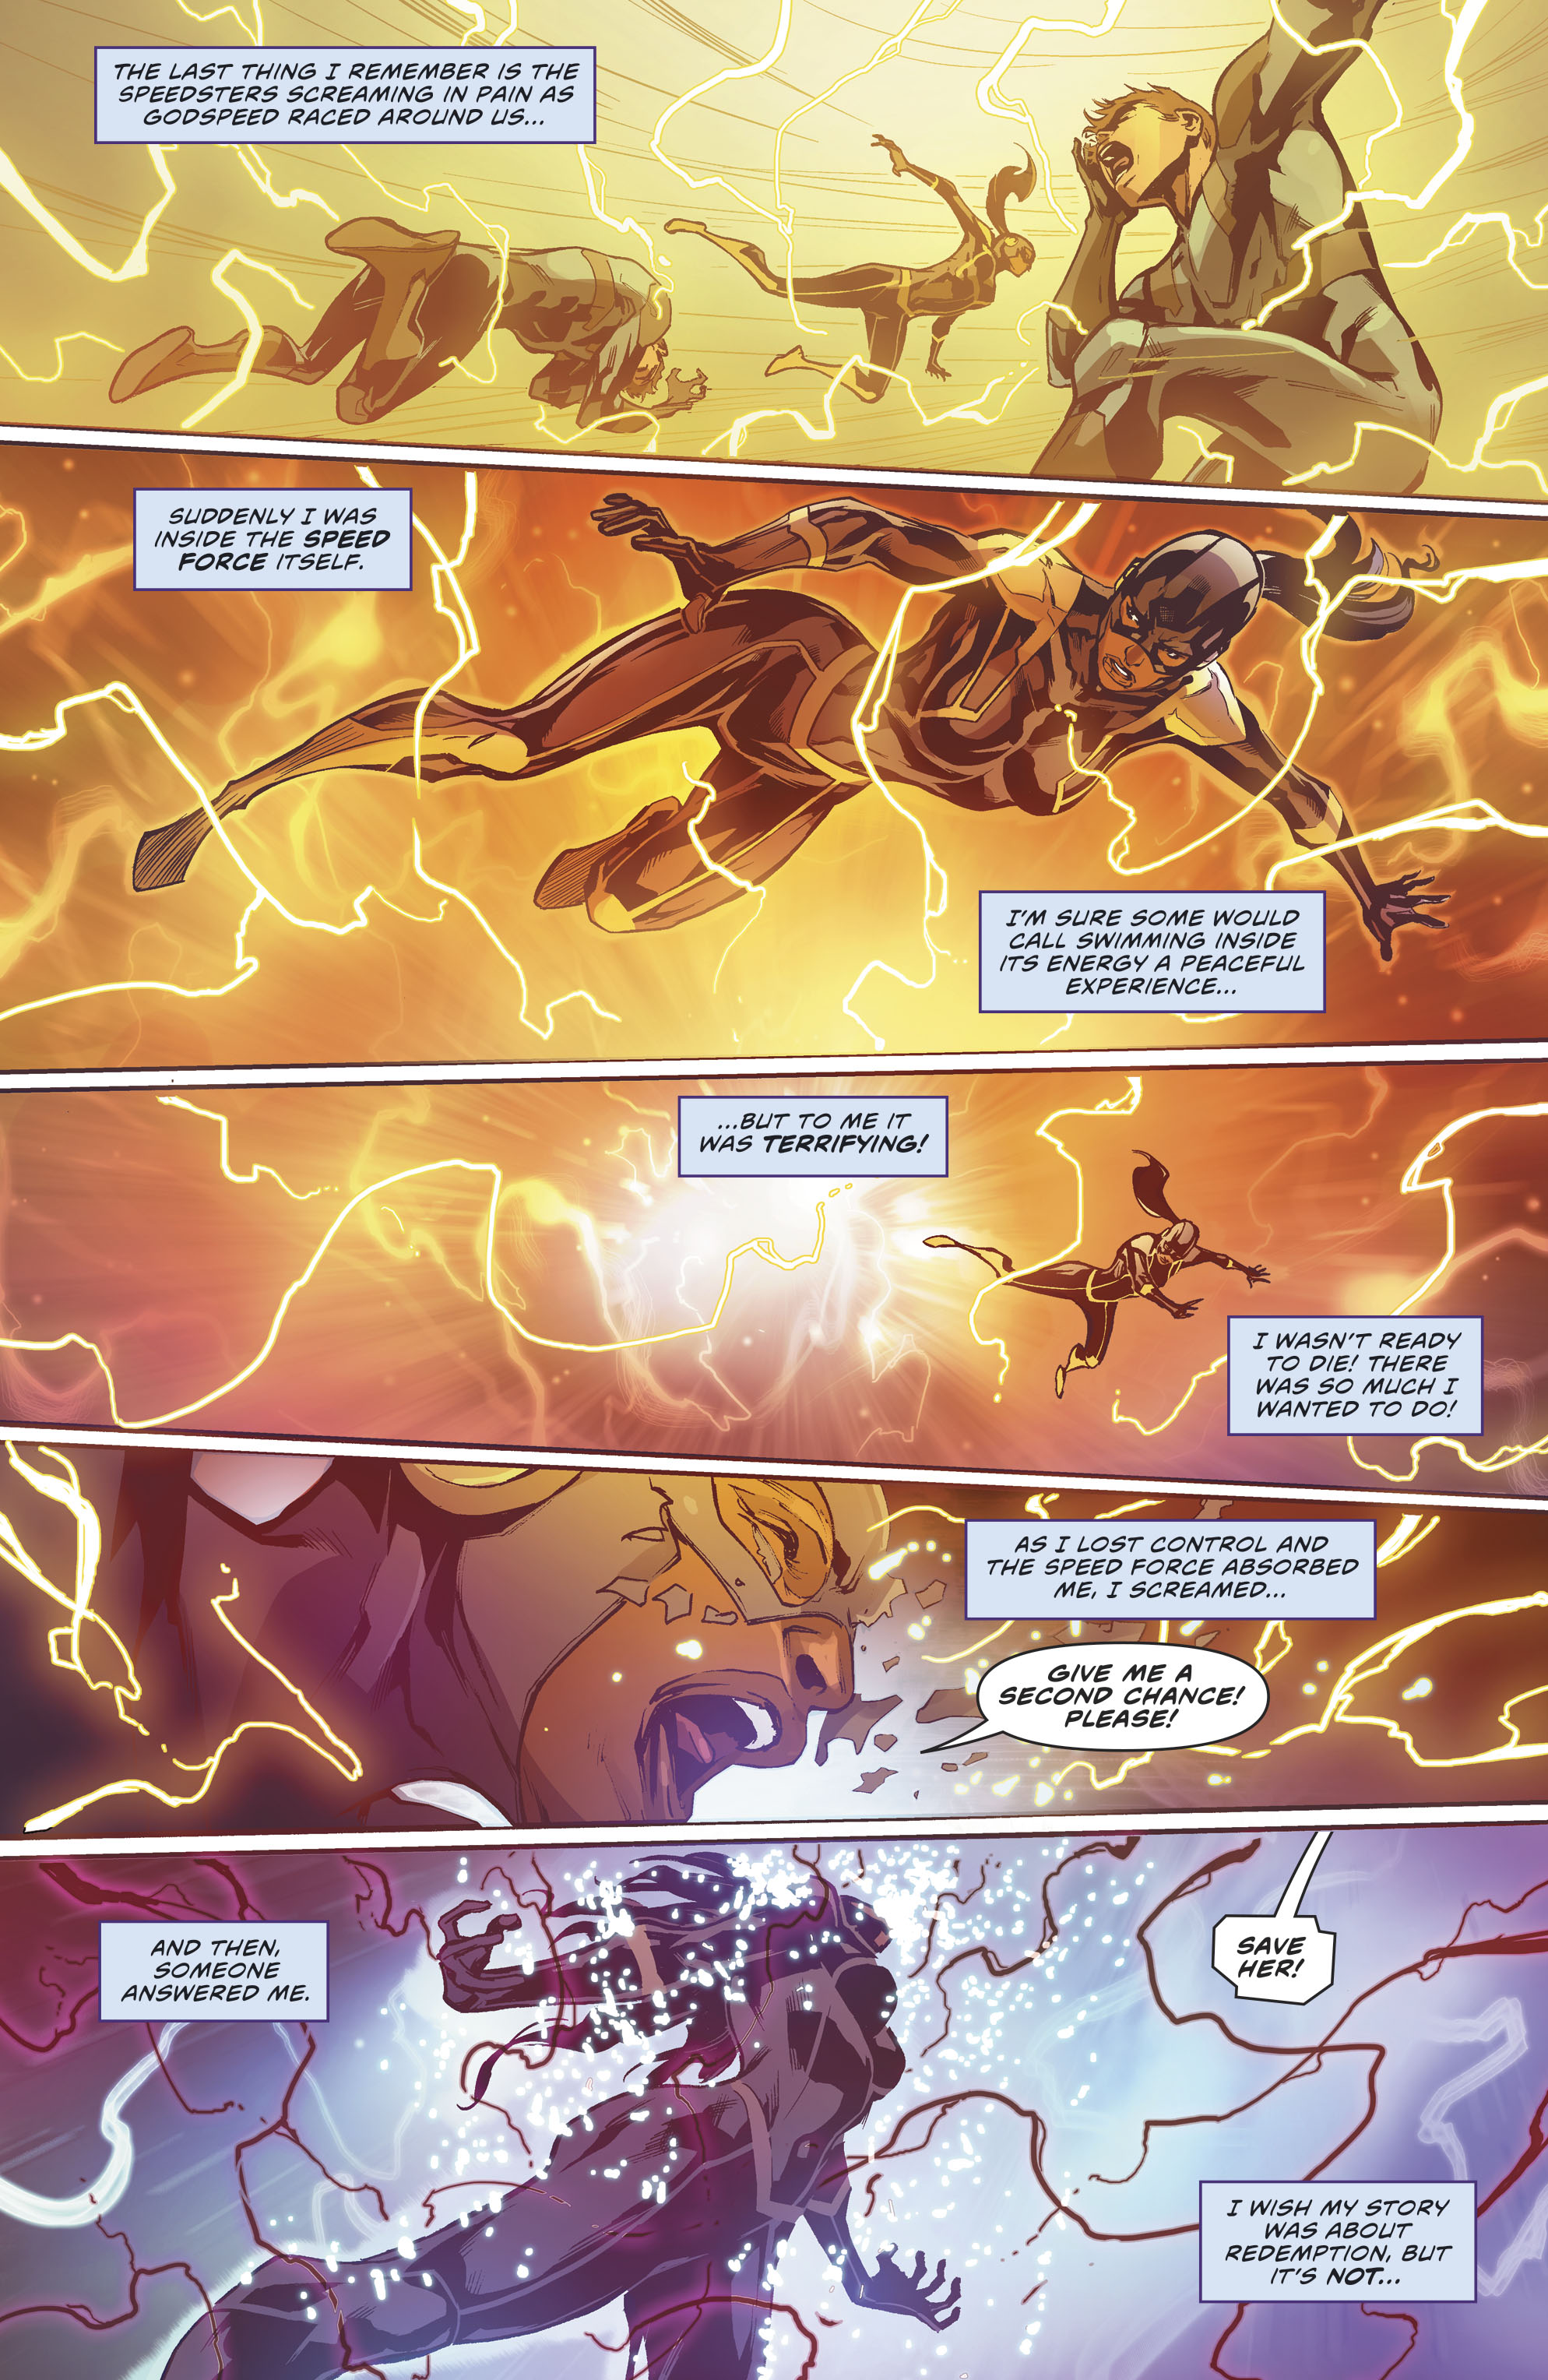 The Flash (2016-): Chapter 35 - Page 4